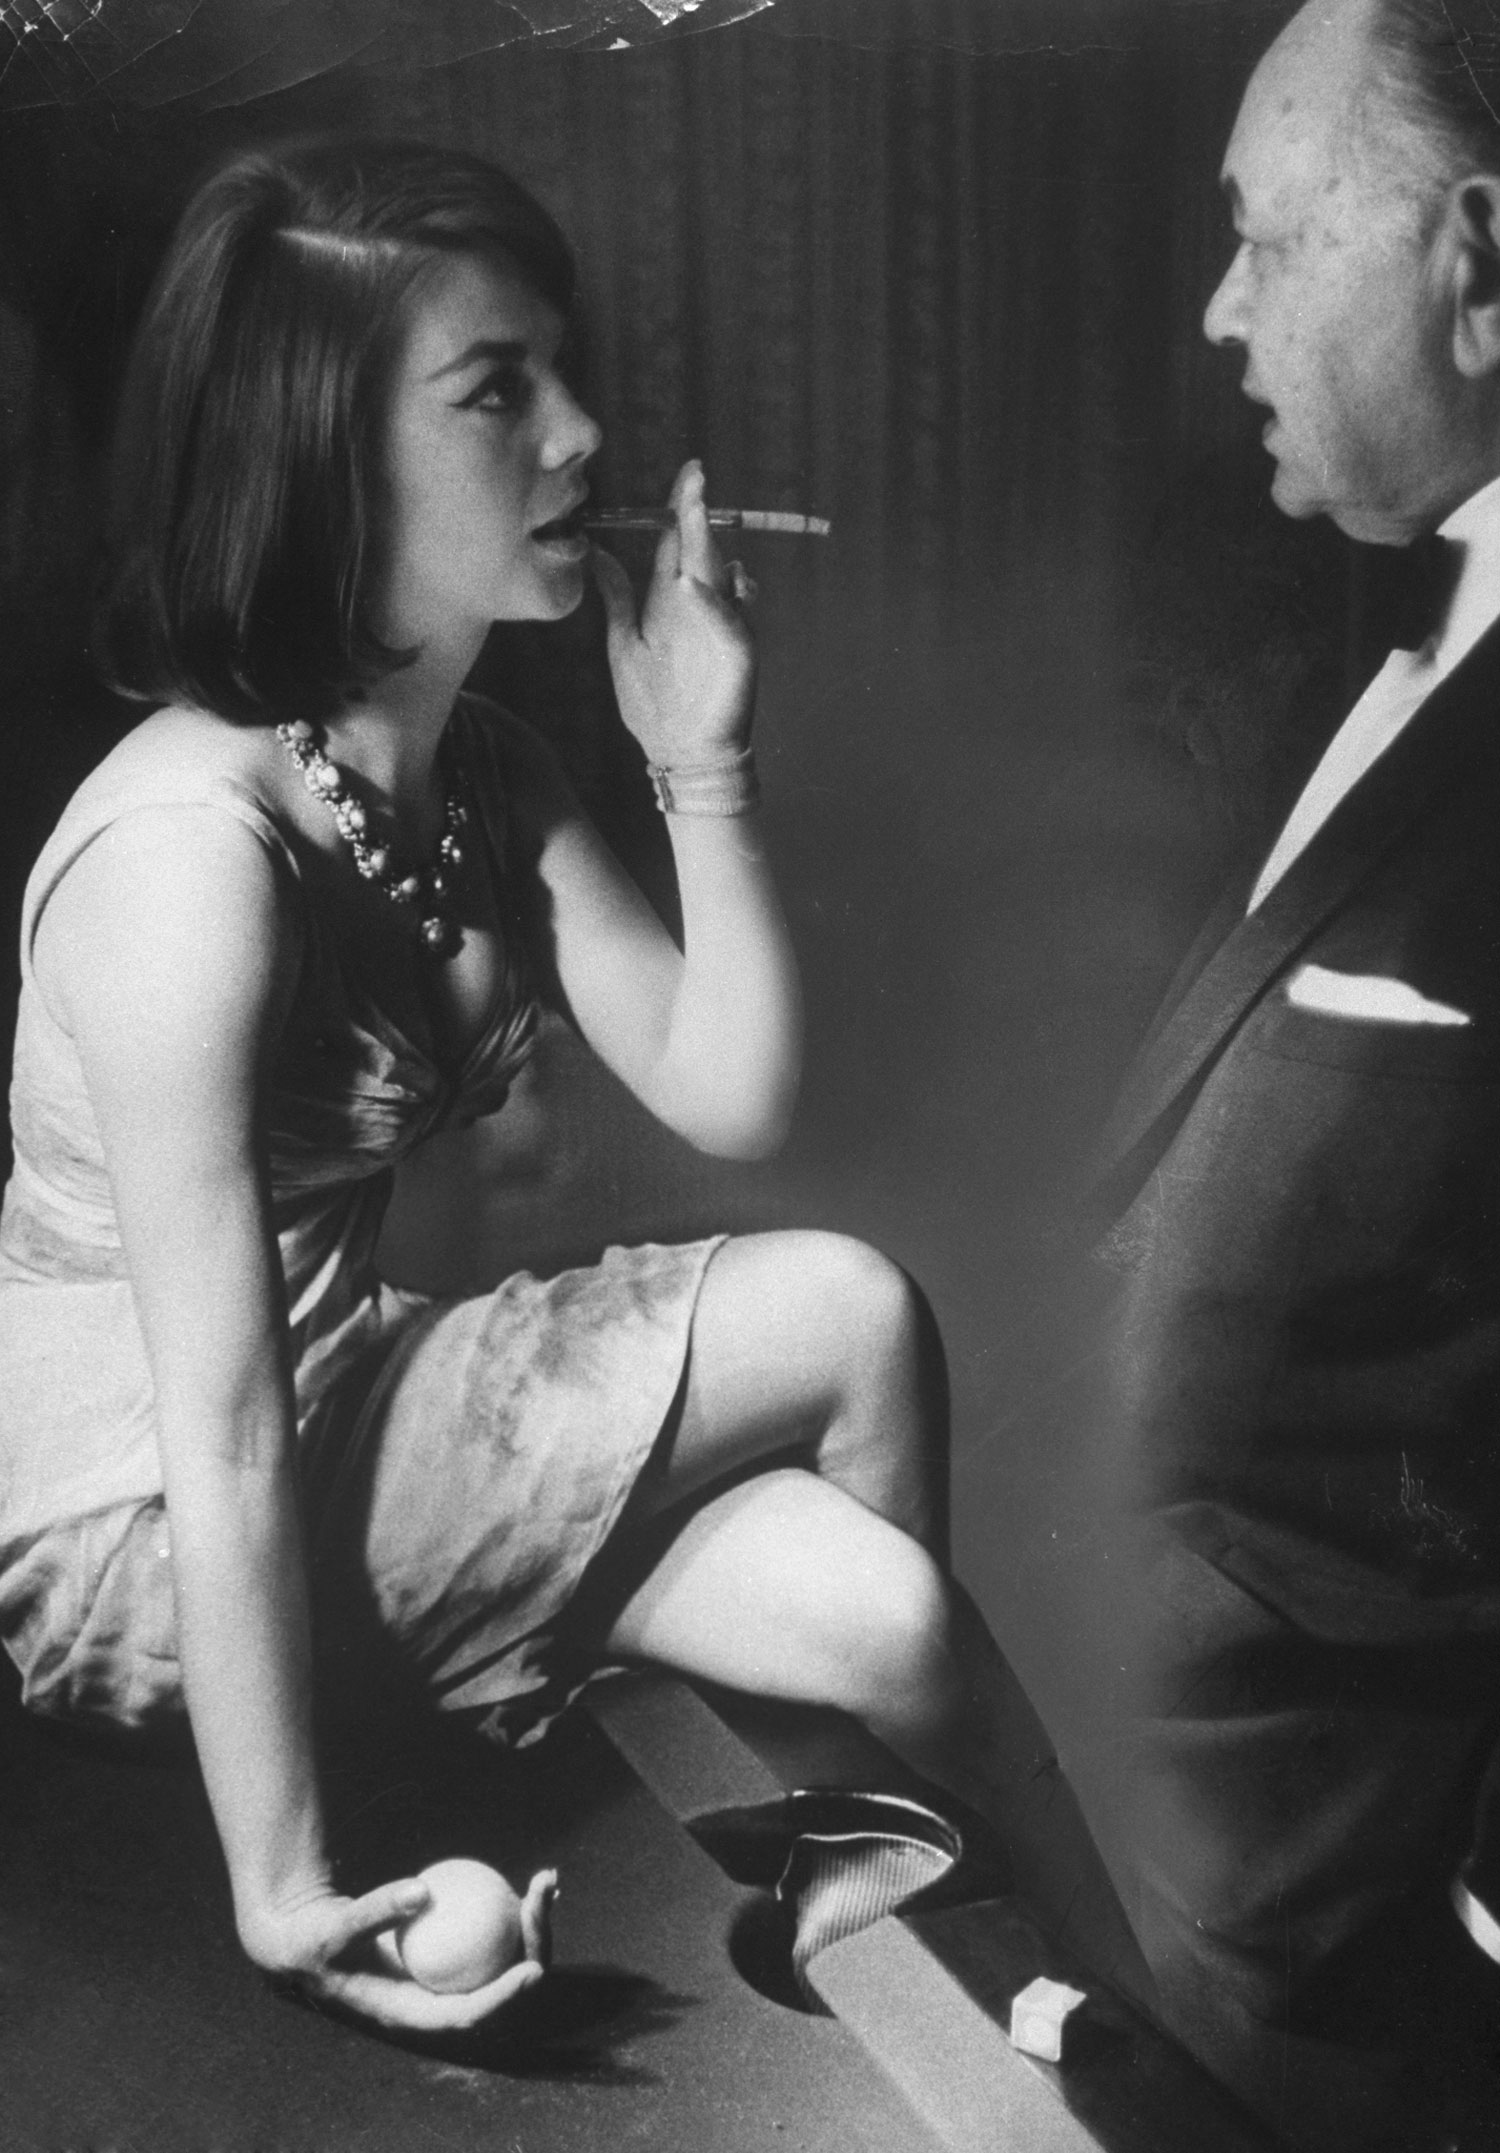 Natalie Wood chats with the movie star Edward G. Robinson, who calls her by her real name, Natasha, in 1963.